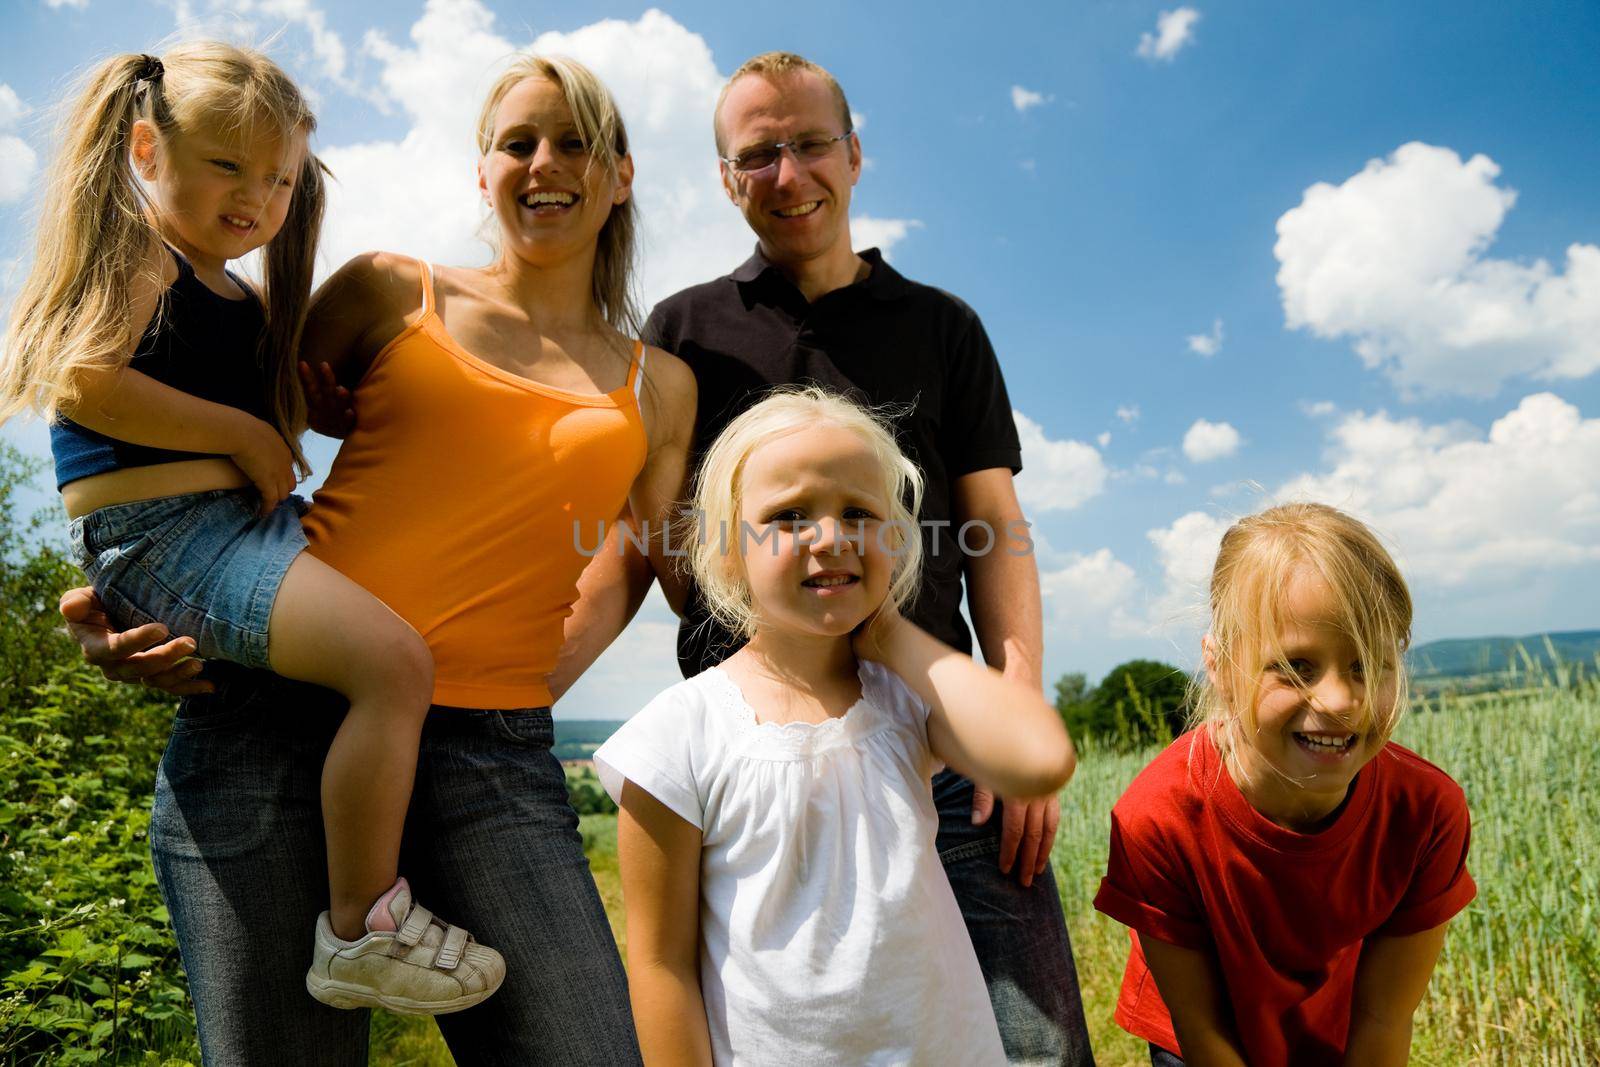 Family of five having an outdoor excursion on a summer day; focus on girls in front